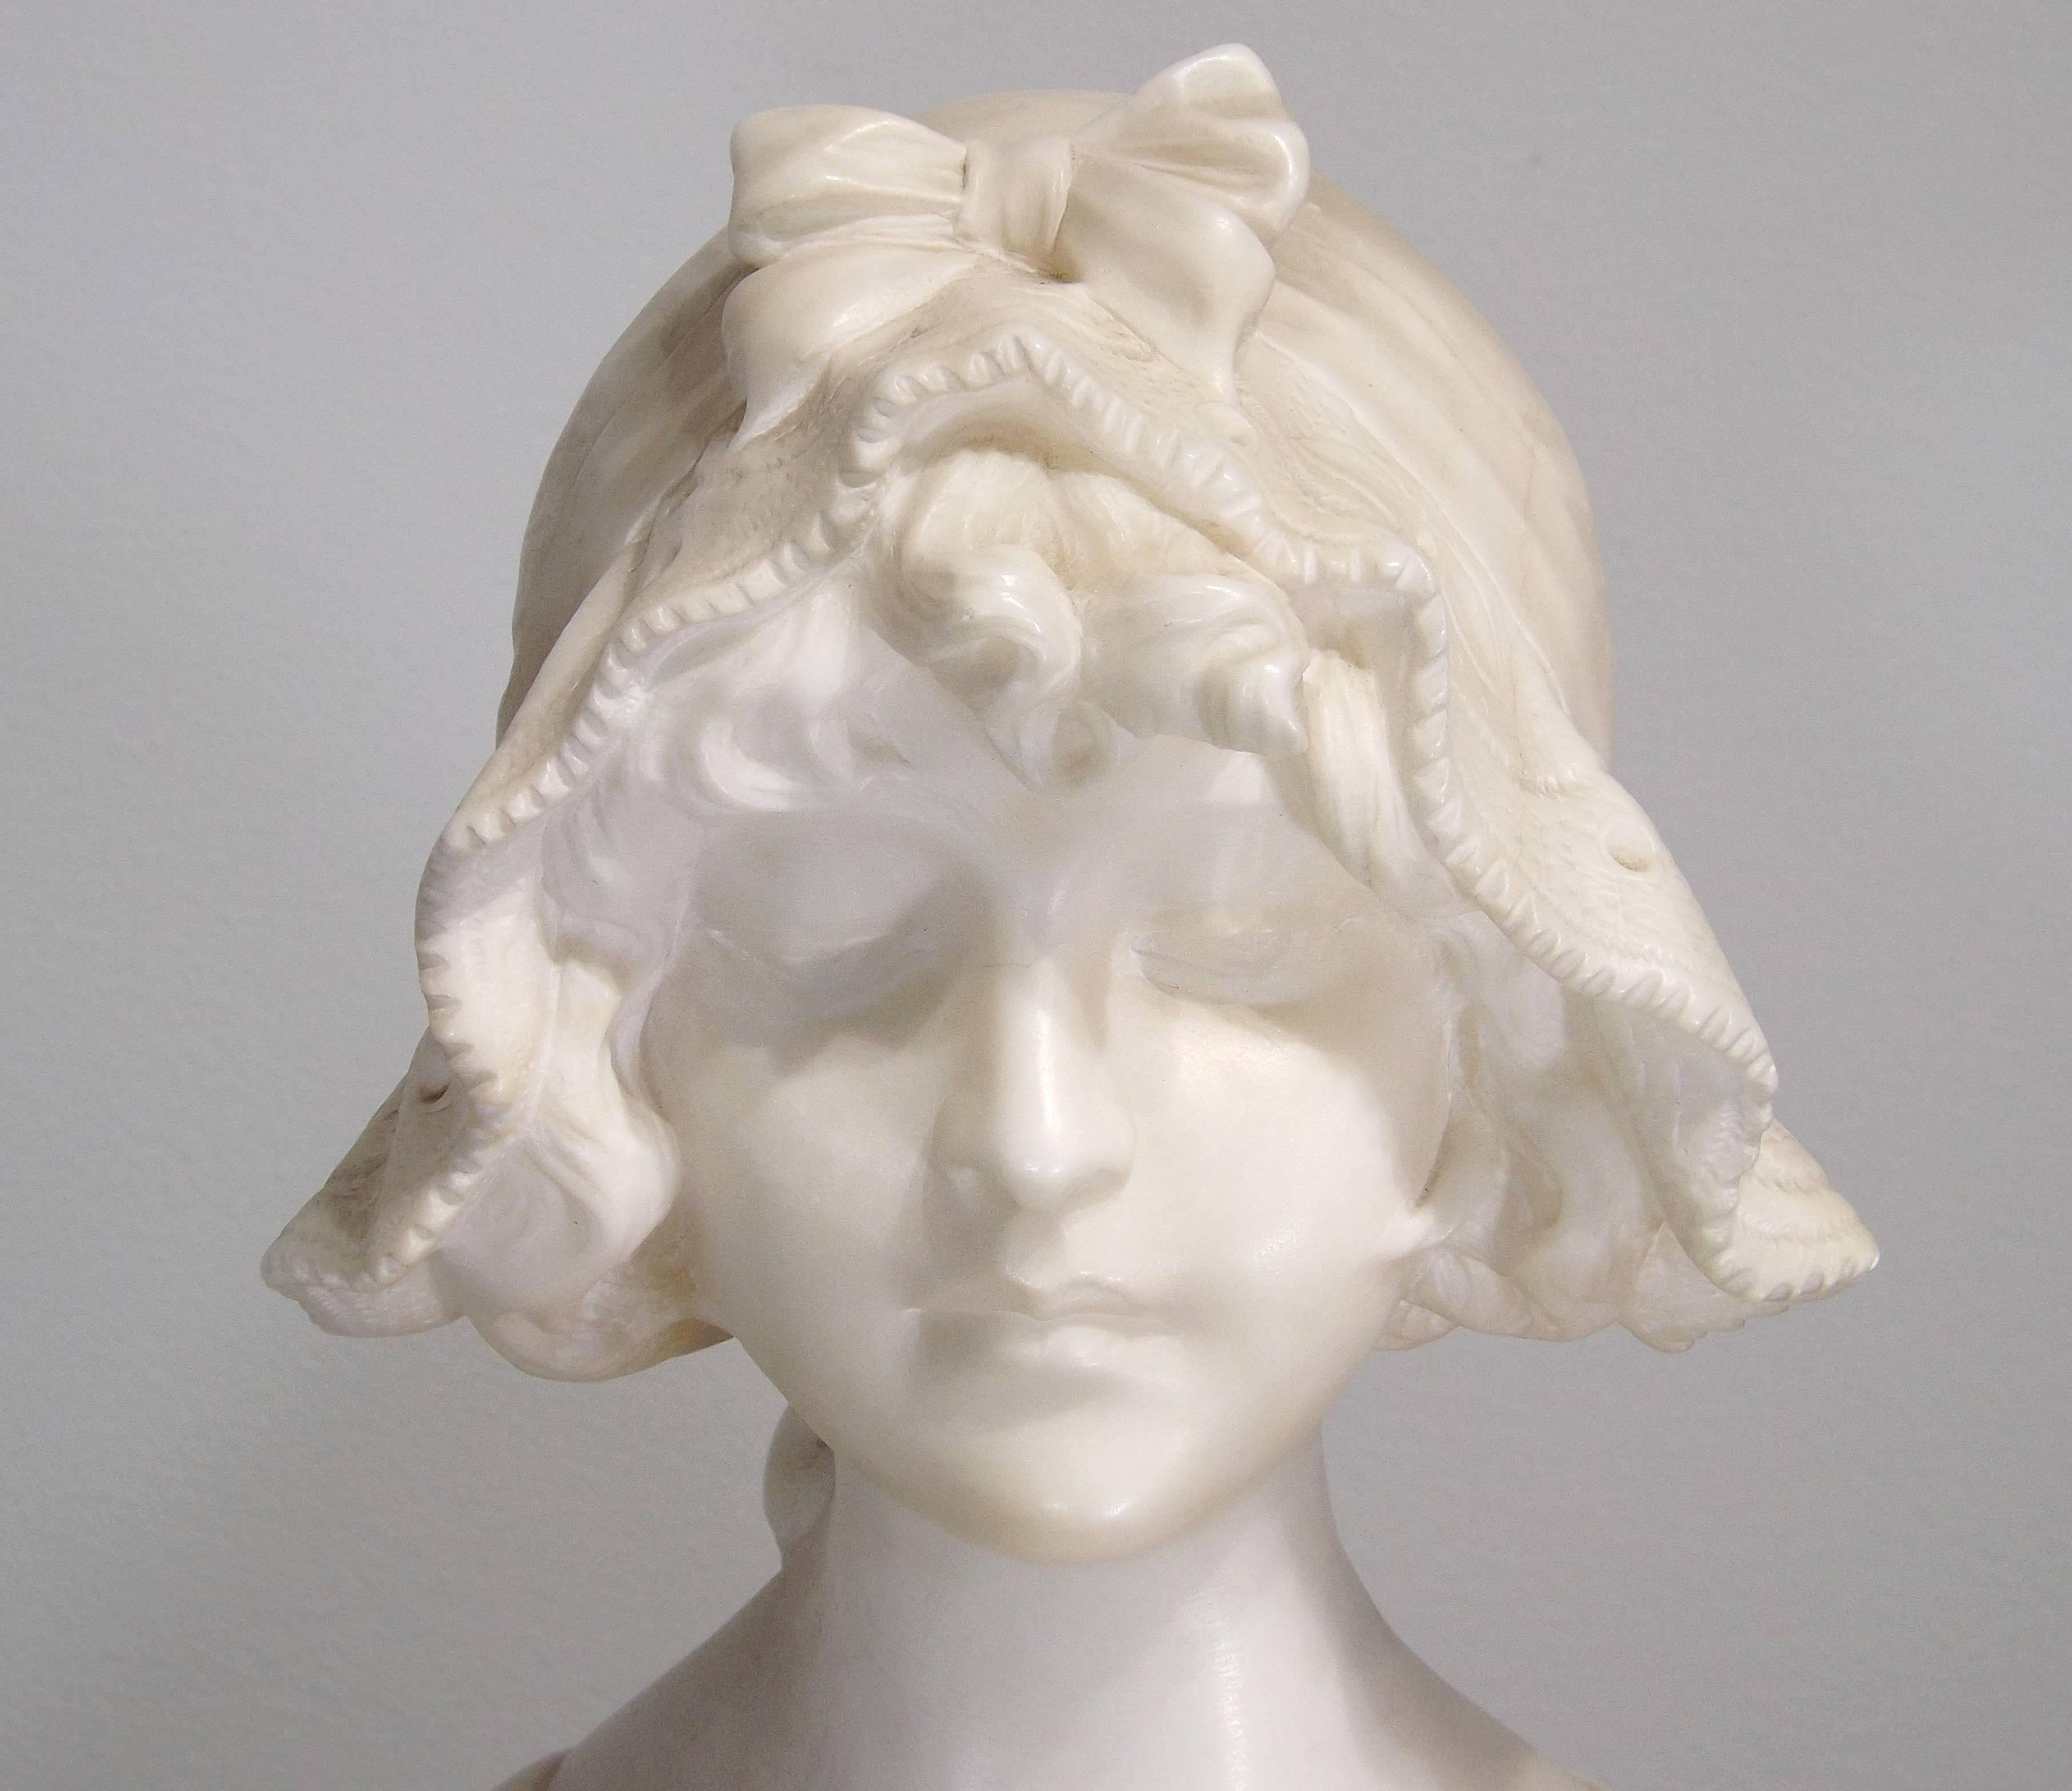 A wonderful bust of a young lady with a lace cap, her eyes cast demurely downward. Very little is known of the European sculptor Anton Nelson, presumably due to his very short life (born 1880, died 1910). Signed on back, lower left side.